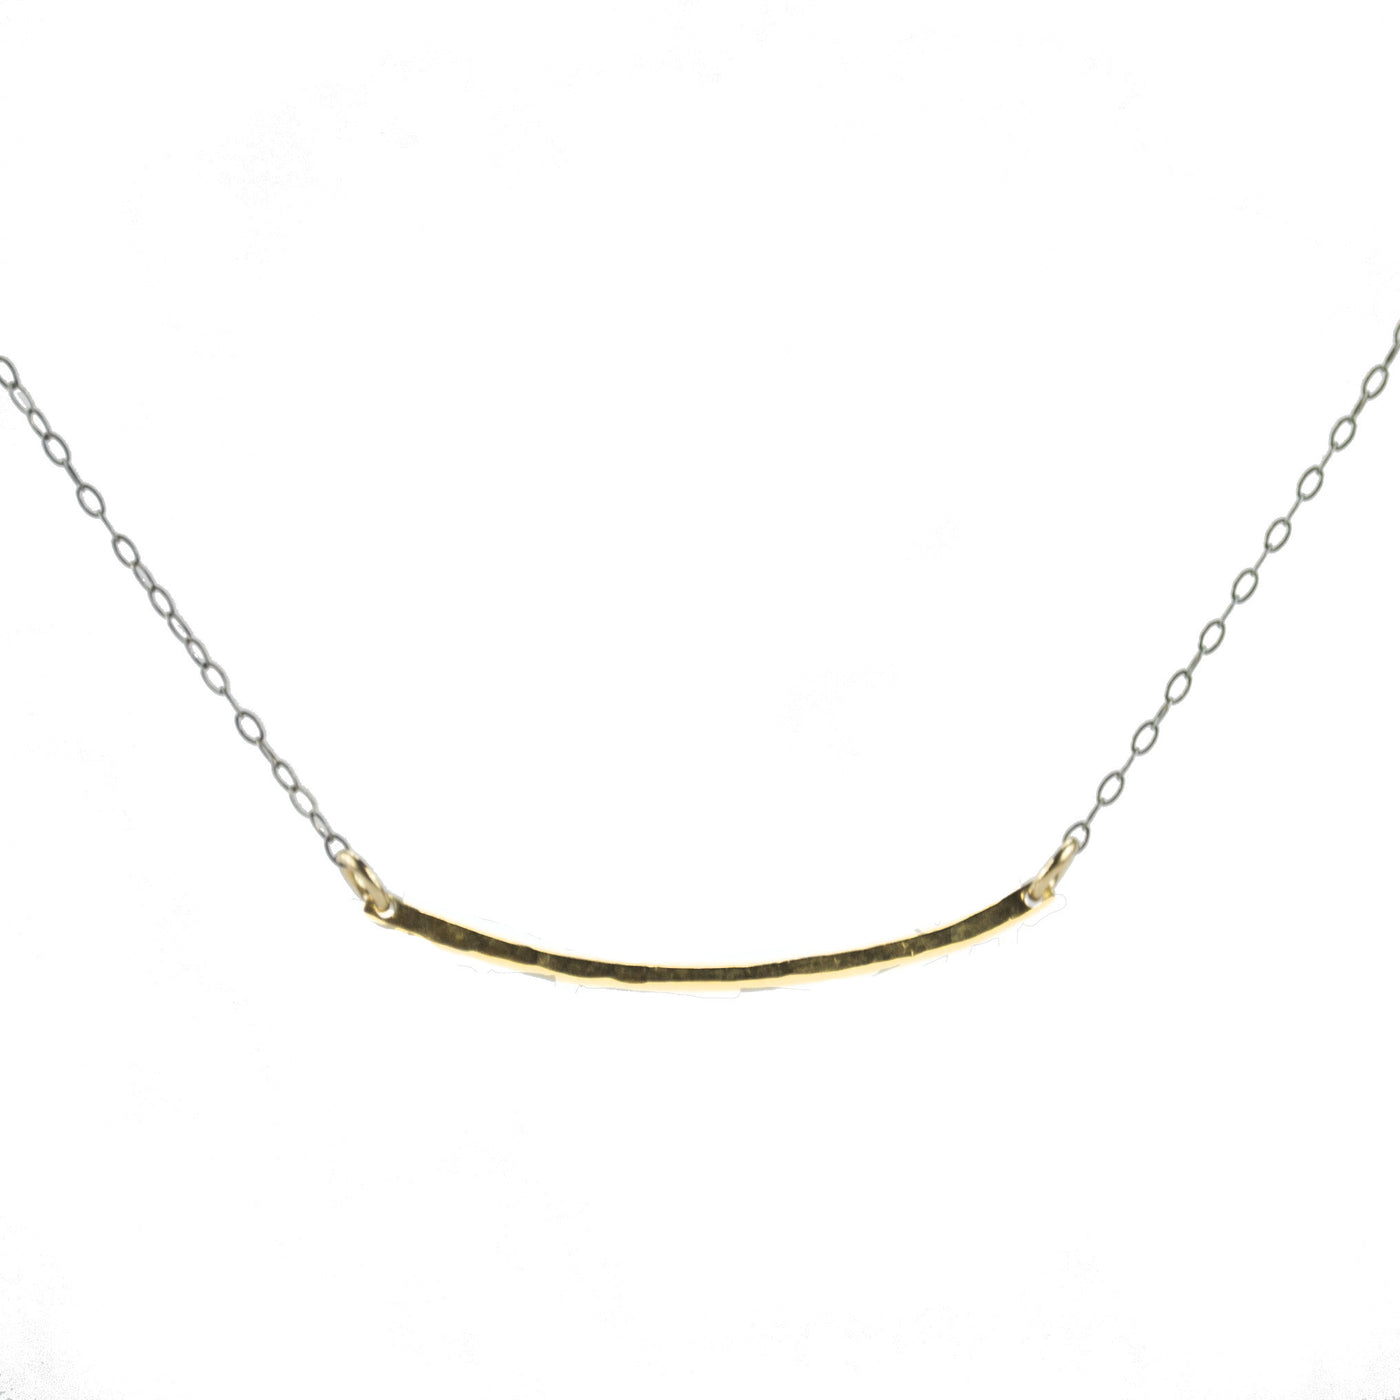 Gold Bar Necklace with Gunmetal Oxidized Chain